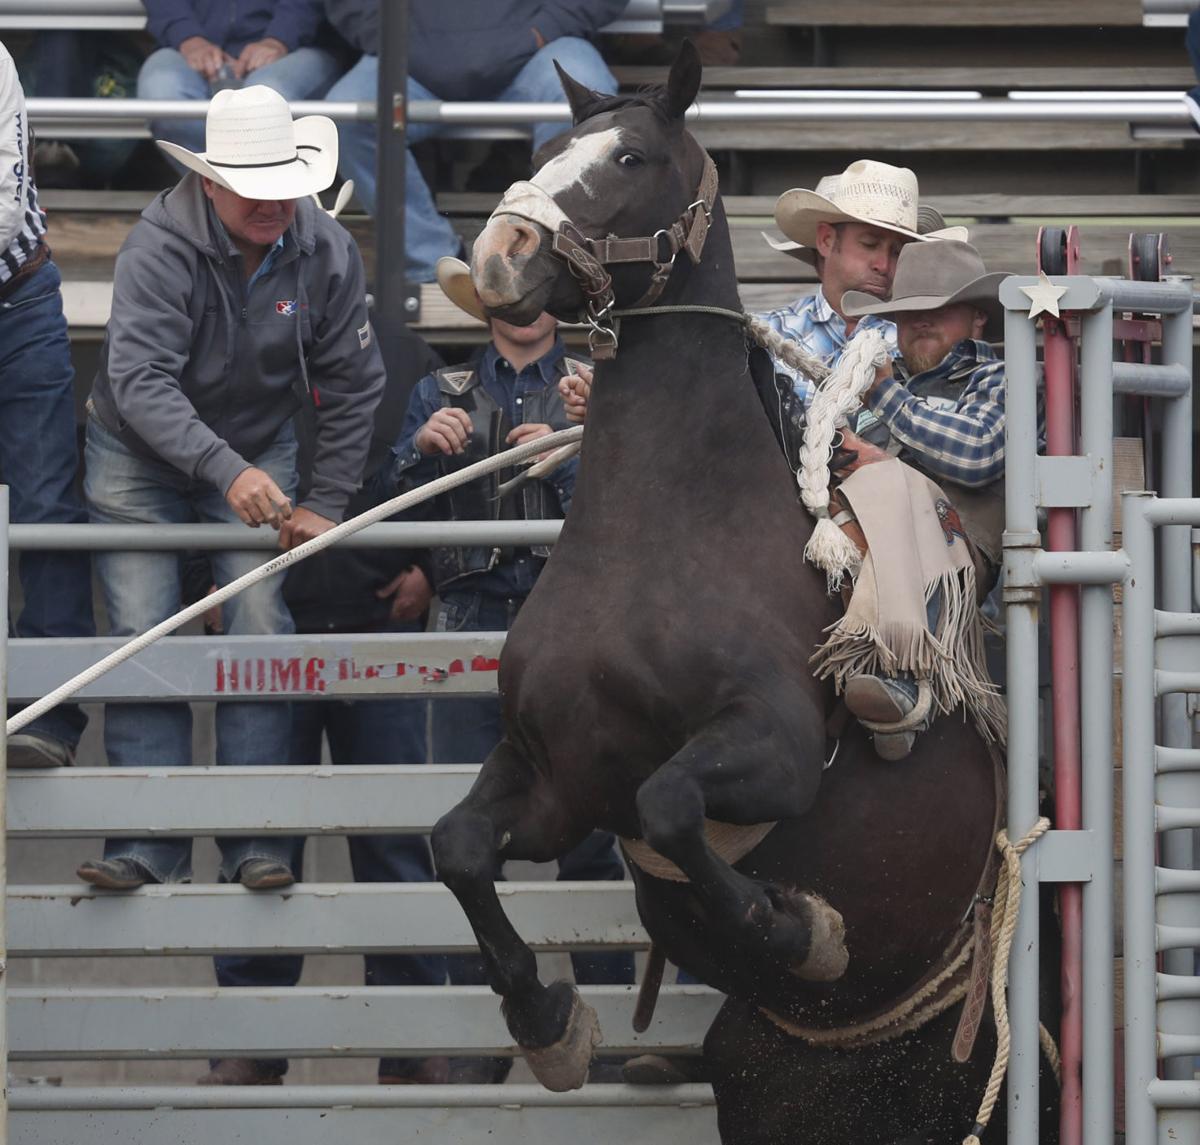 Photos Riders compete in the Home of the Champions Rodeo in Red Lodge